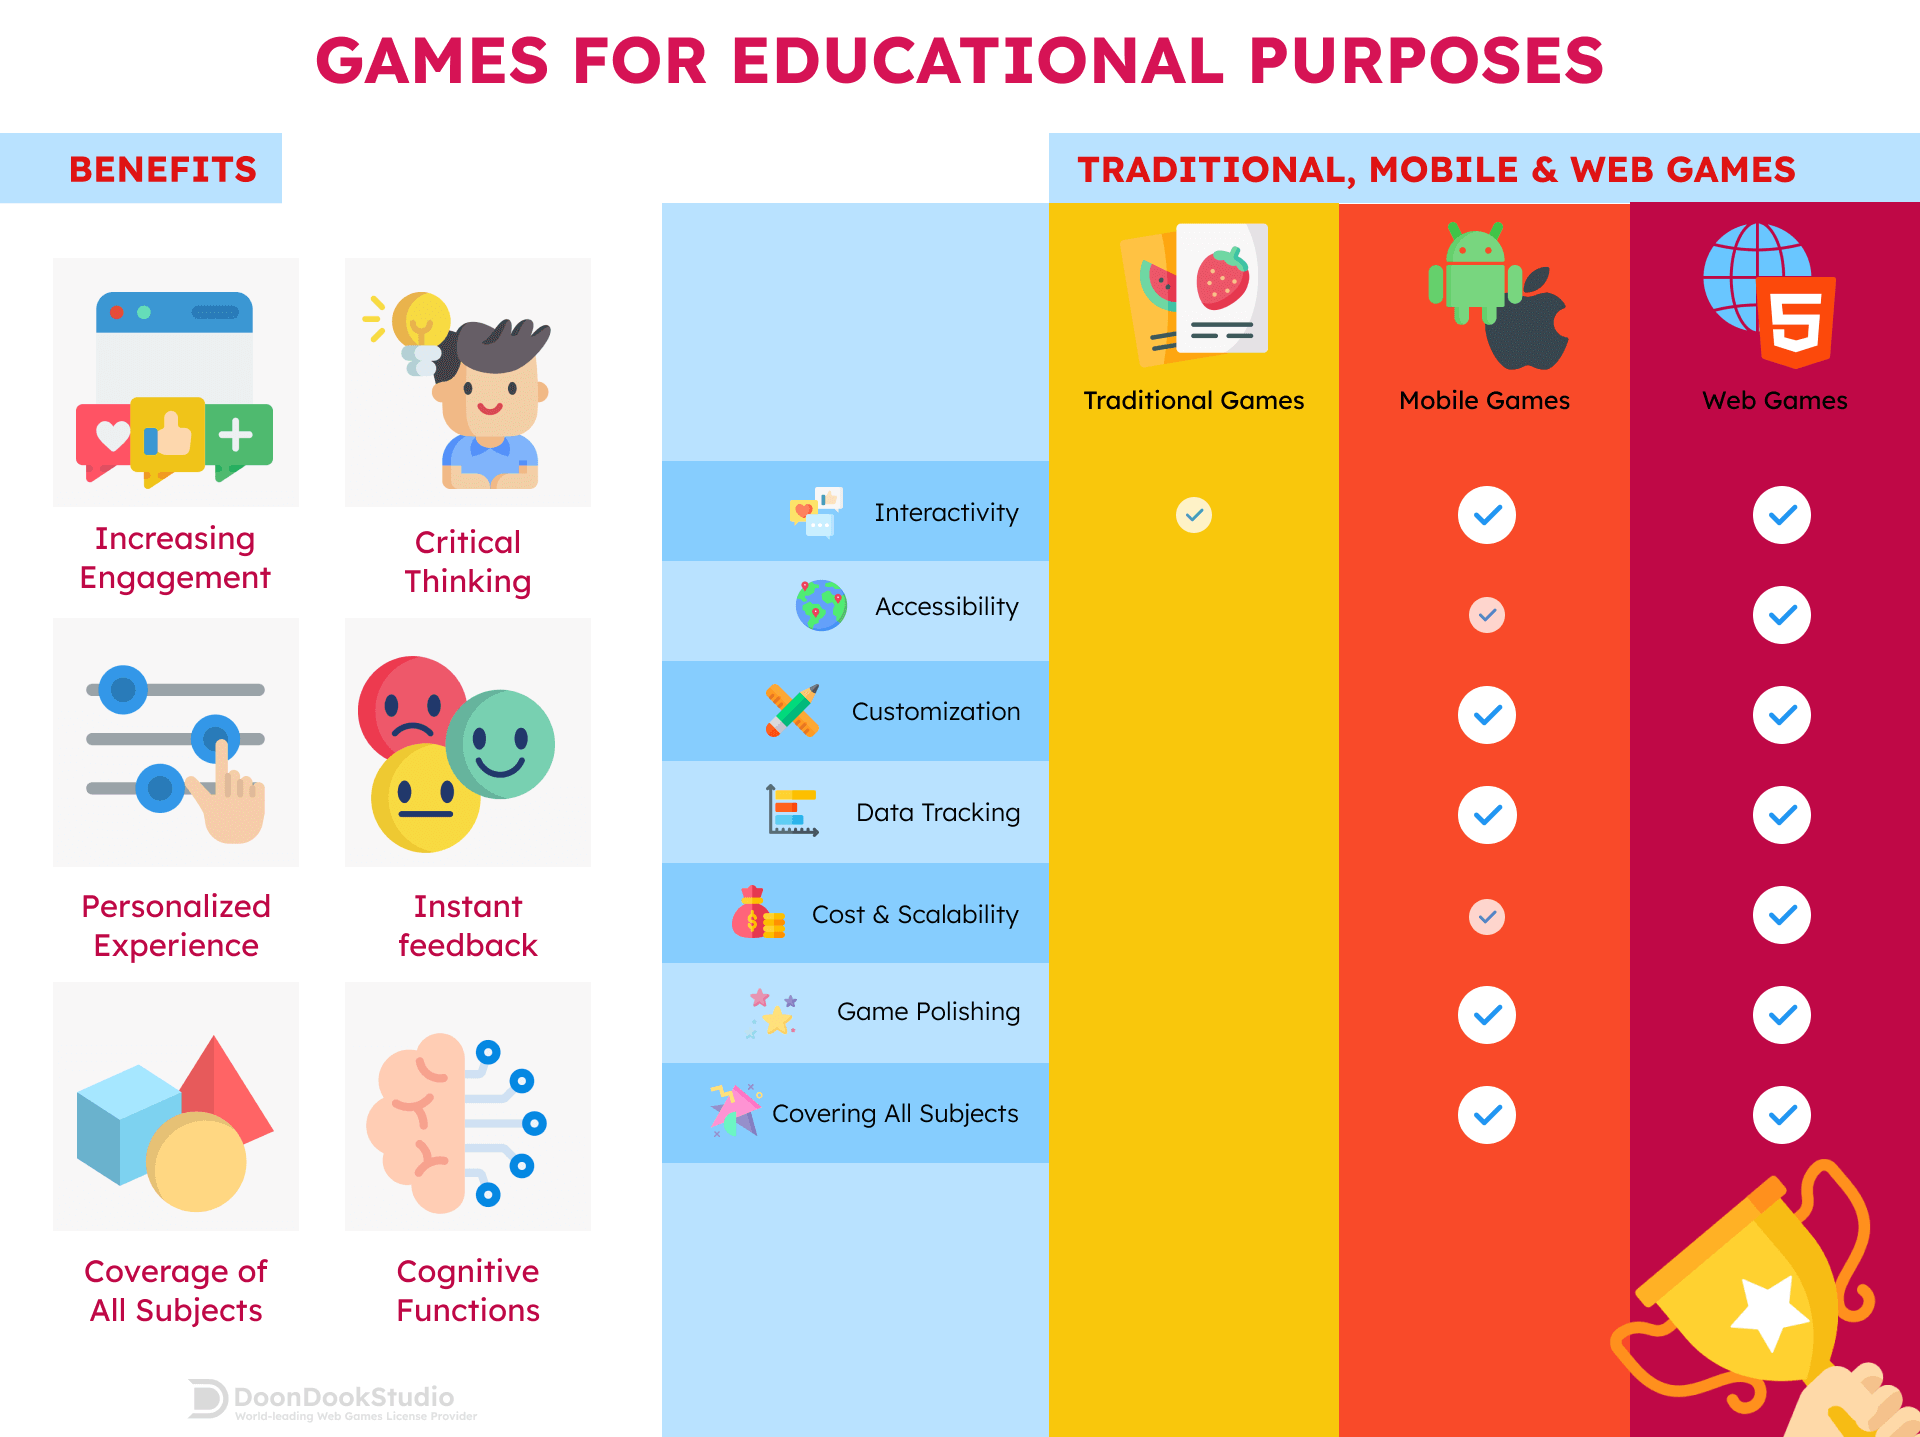 Games for Educational Purposes - Types, Benefits, and Features